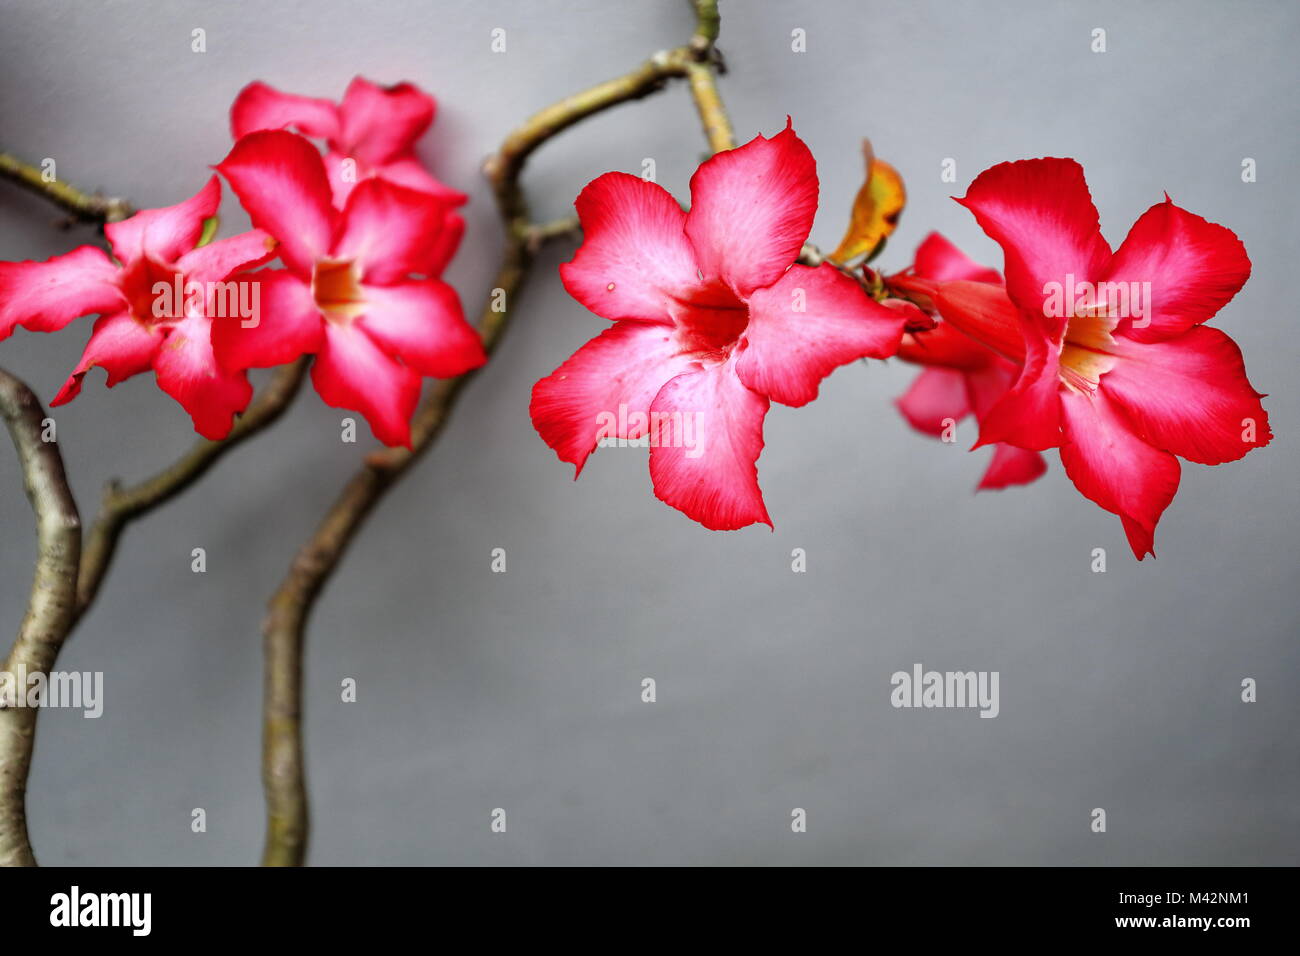 Red Pinkish Desert Rose Flowers Blooming In A Garden Between The